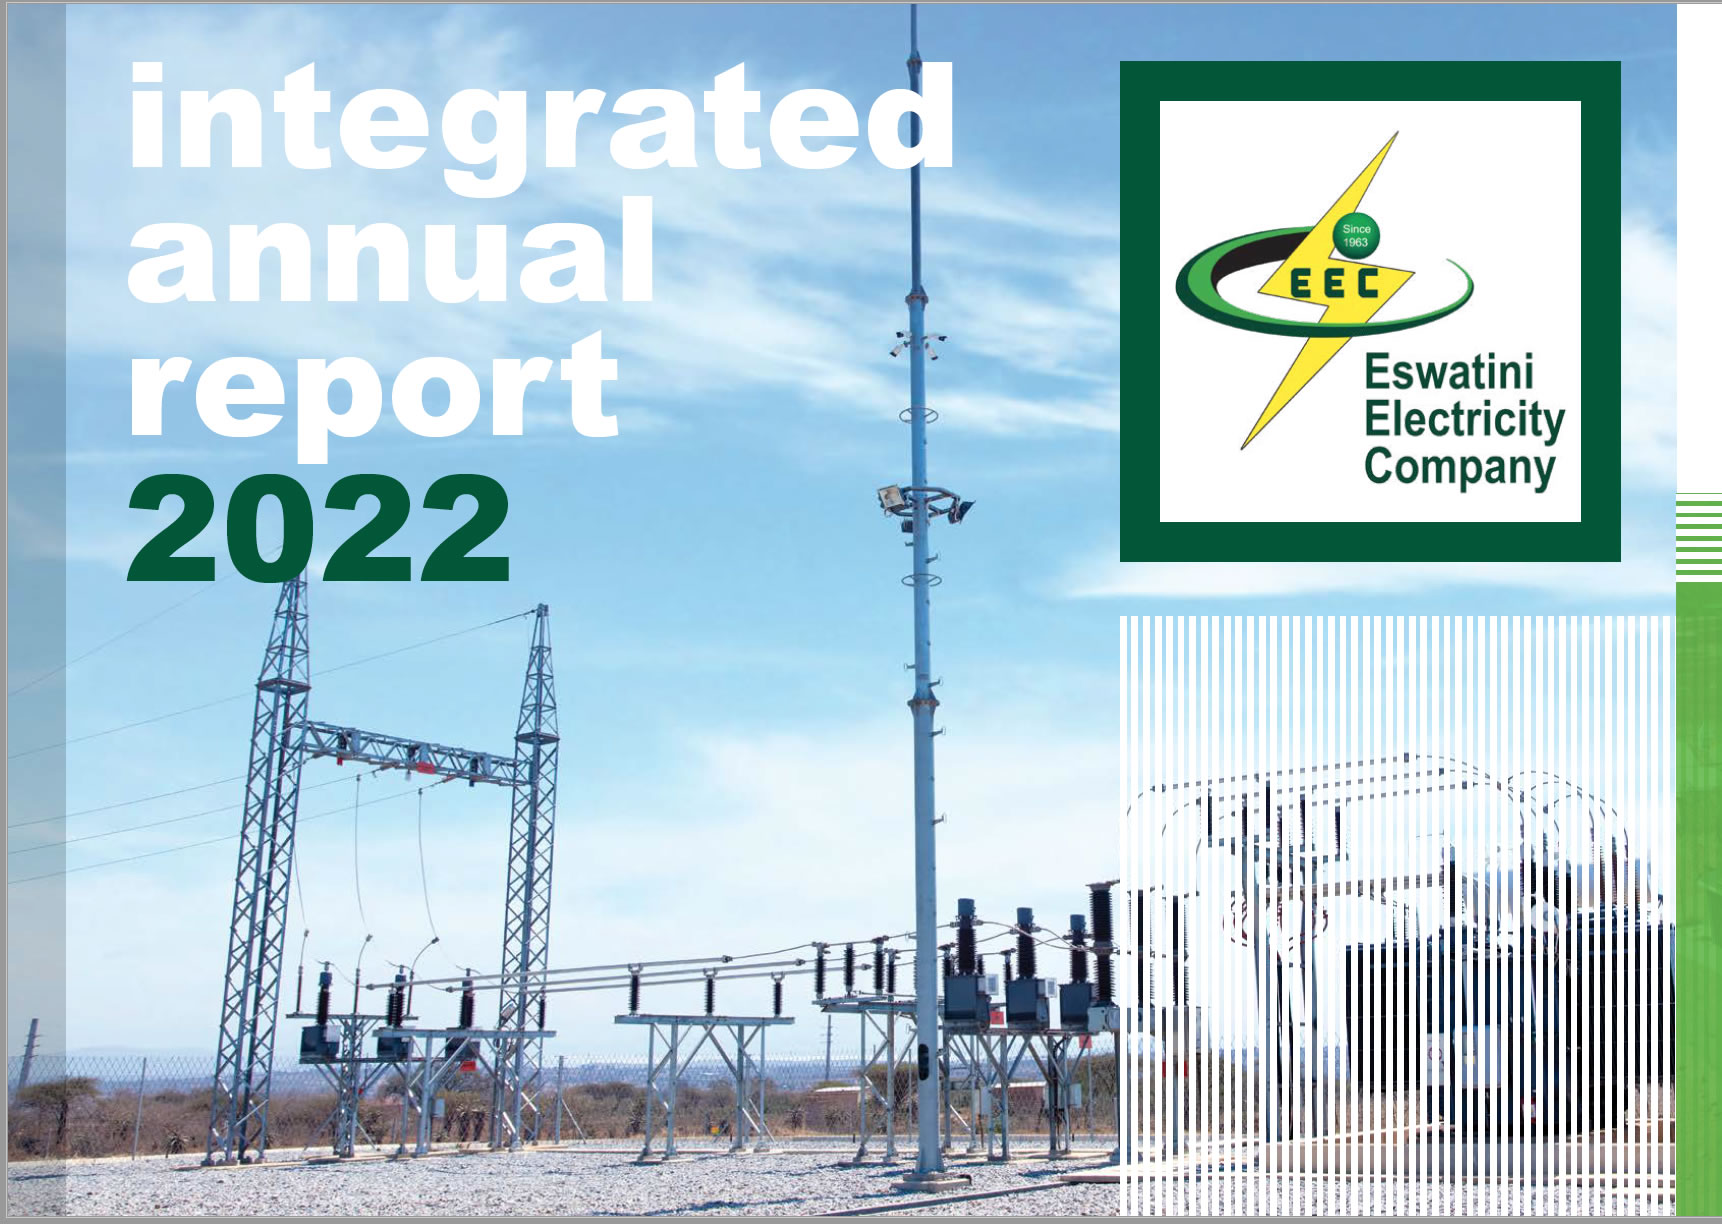 INTEGRATED ANNUAL REPORT 2022